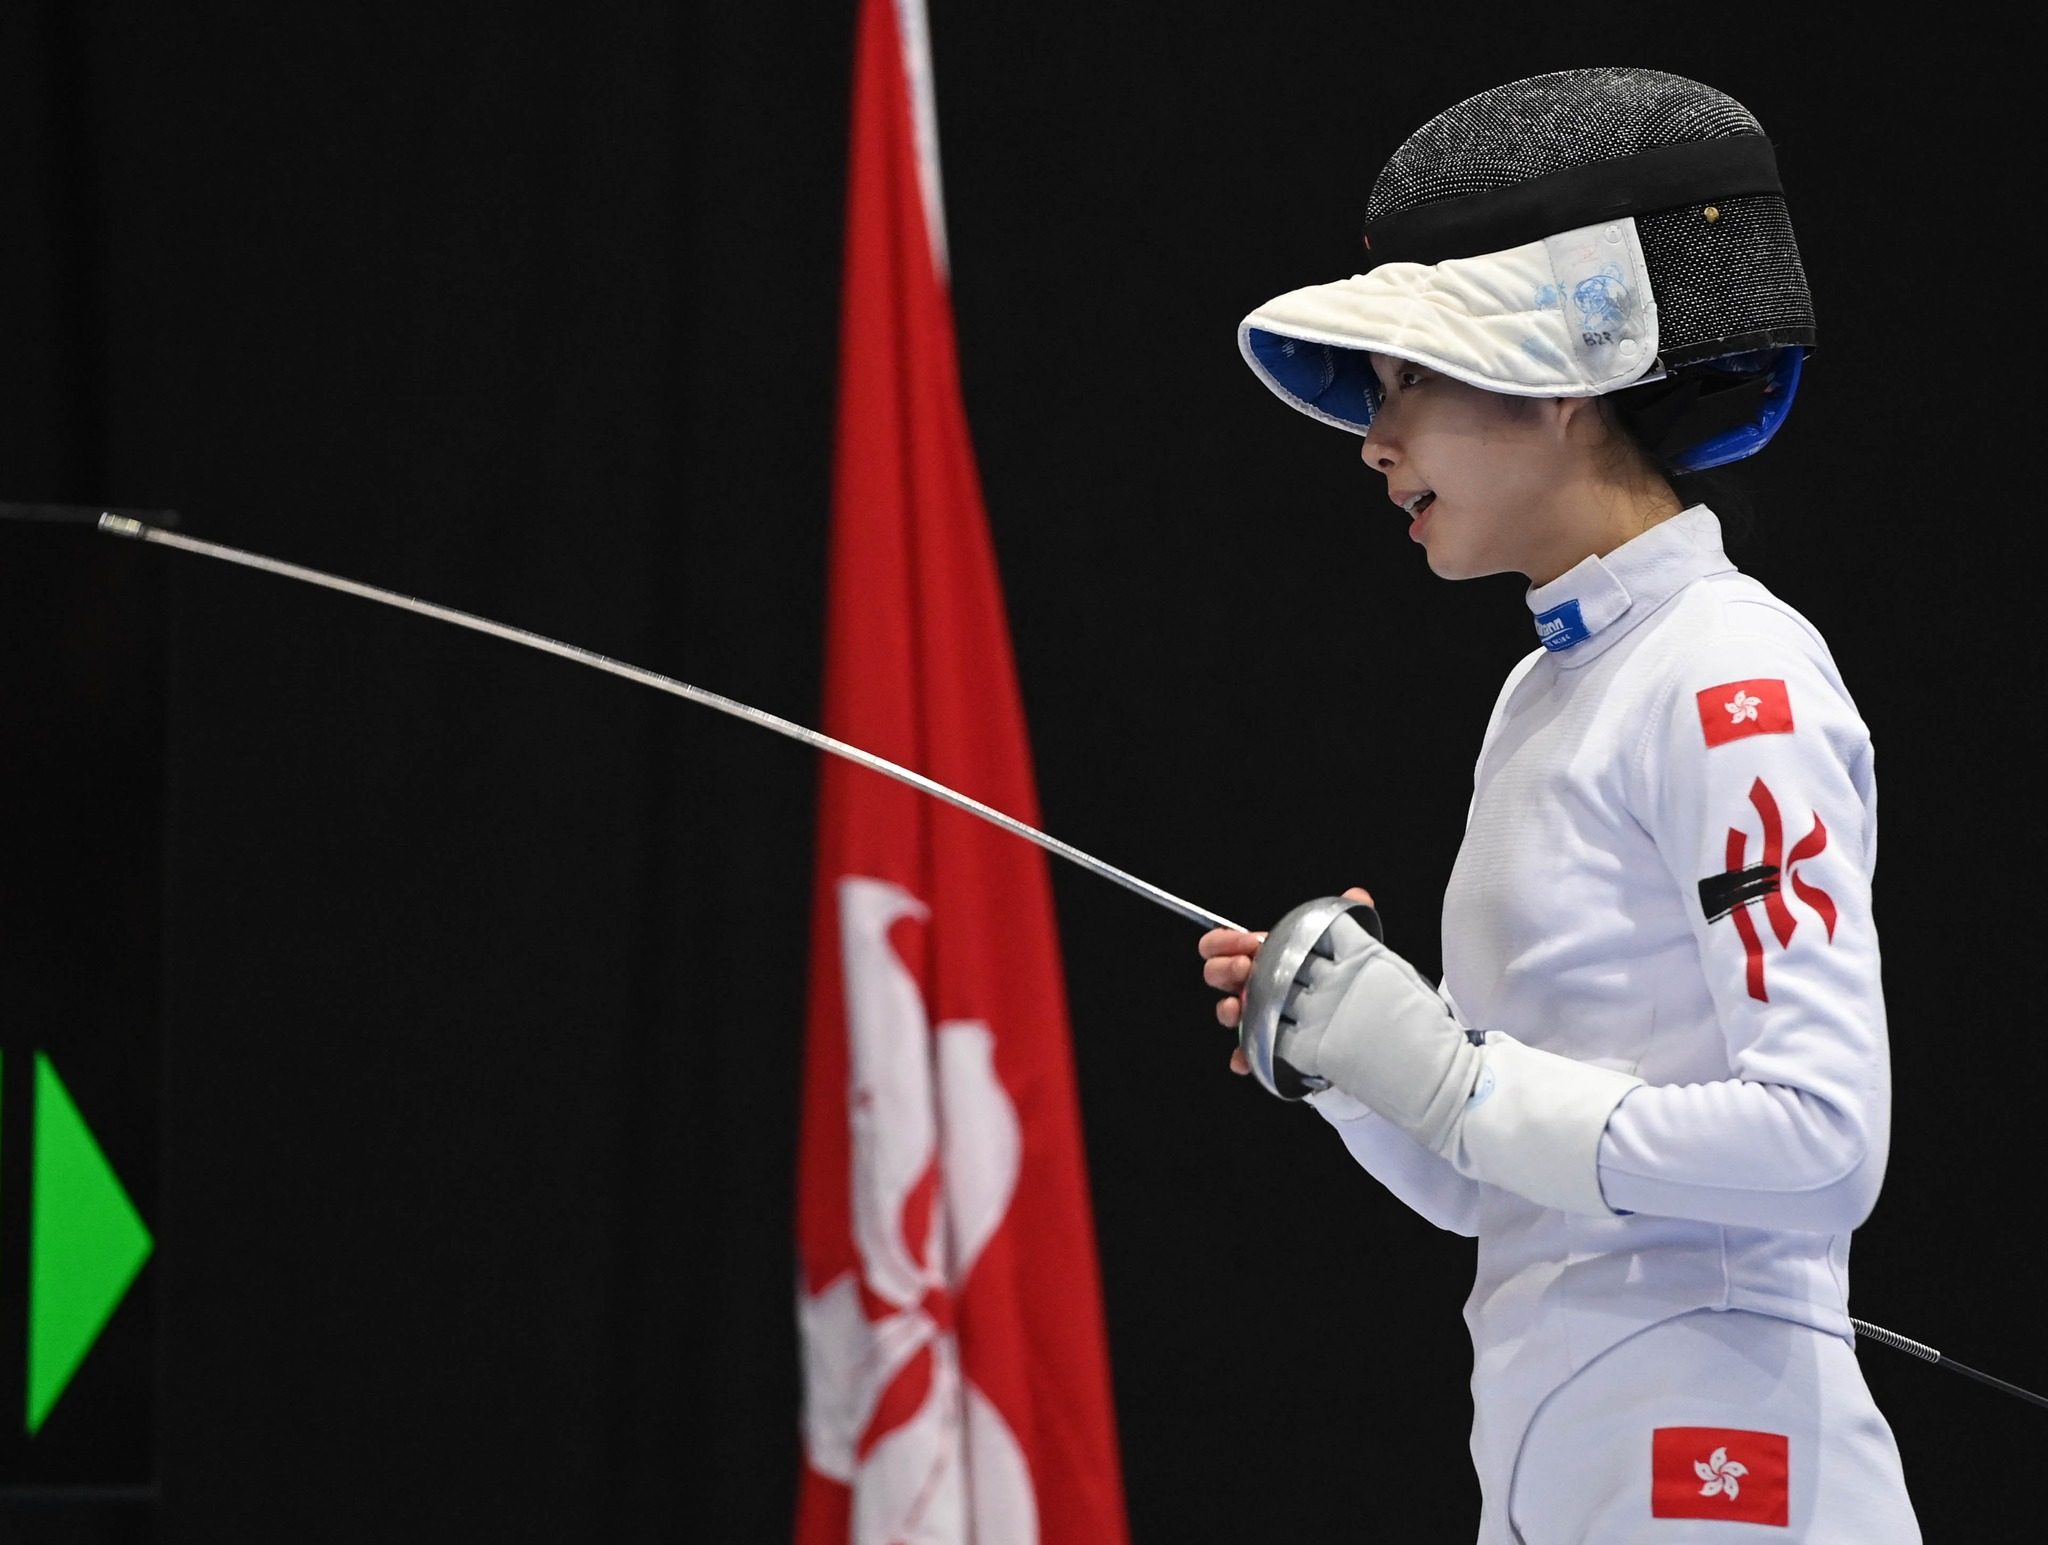 Vivian Kong starts Hong Kong’s hunt for medals in the épée fencing competition. Photo: FIE